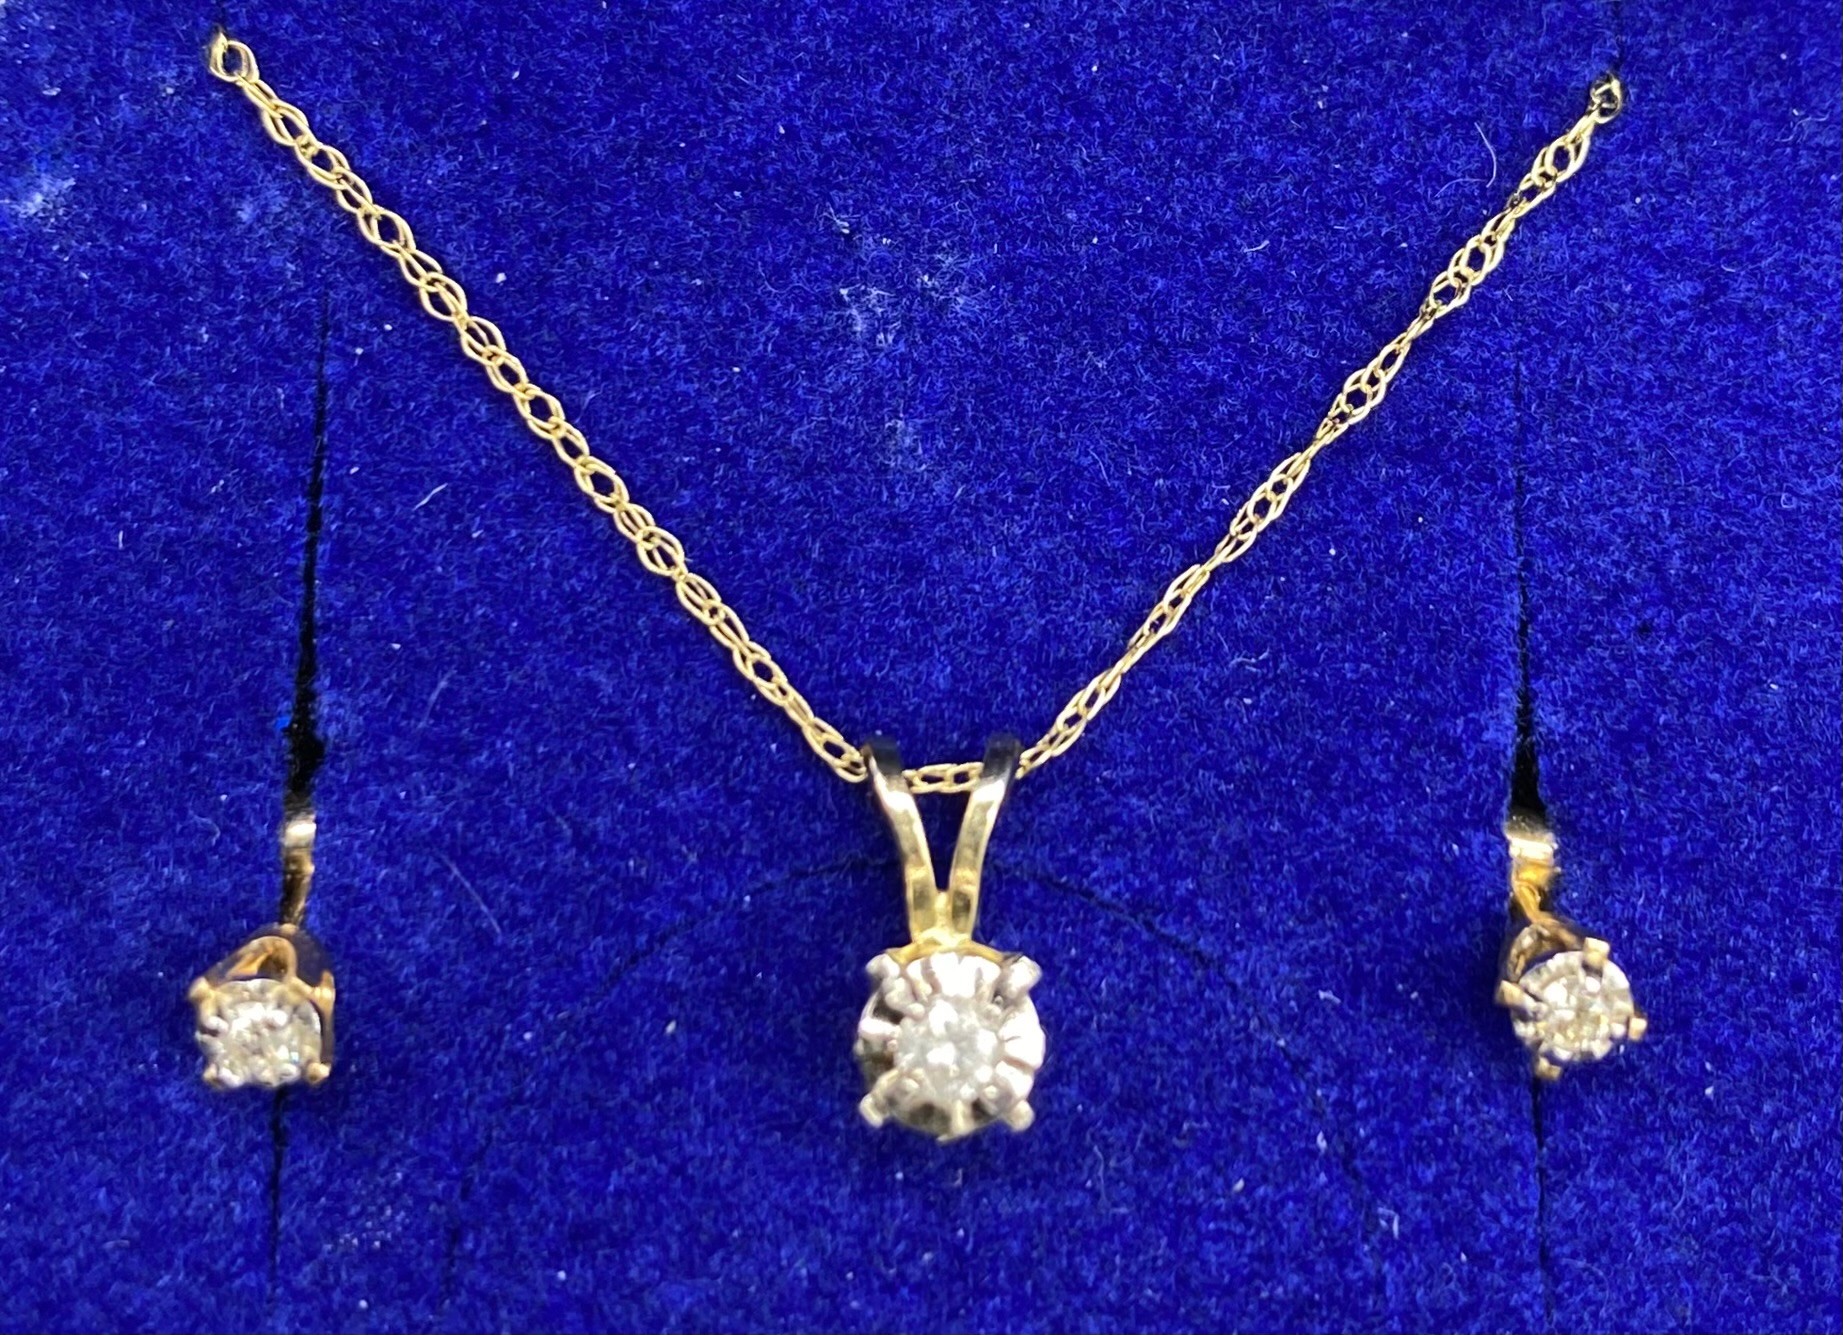 9ct gold 375 hallmarked chain pendant & earrings set with small diamonds - Image 2 of 2